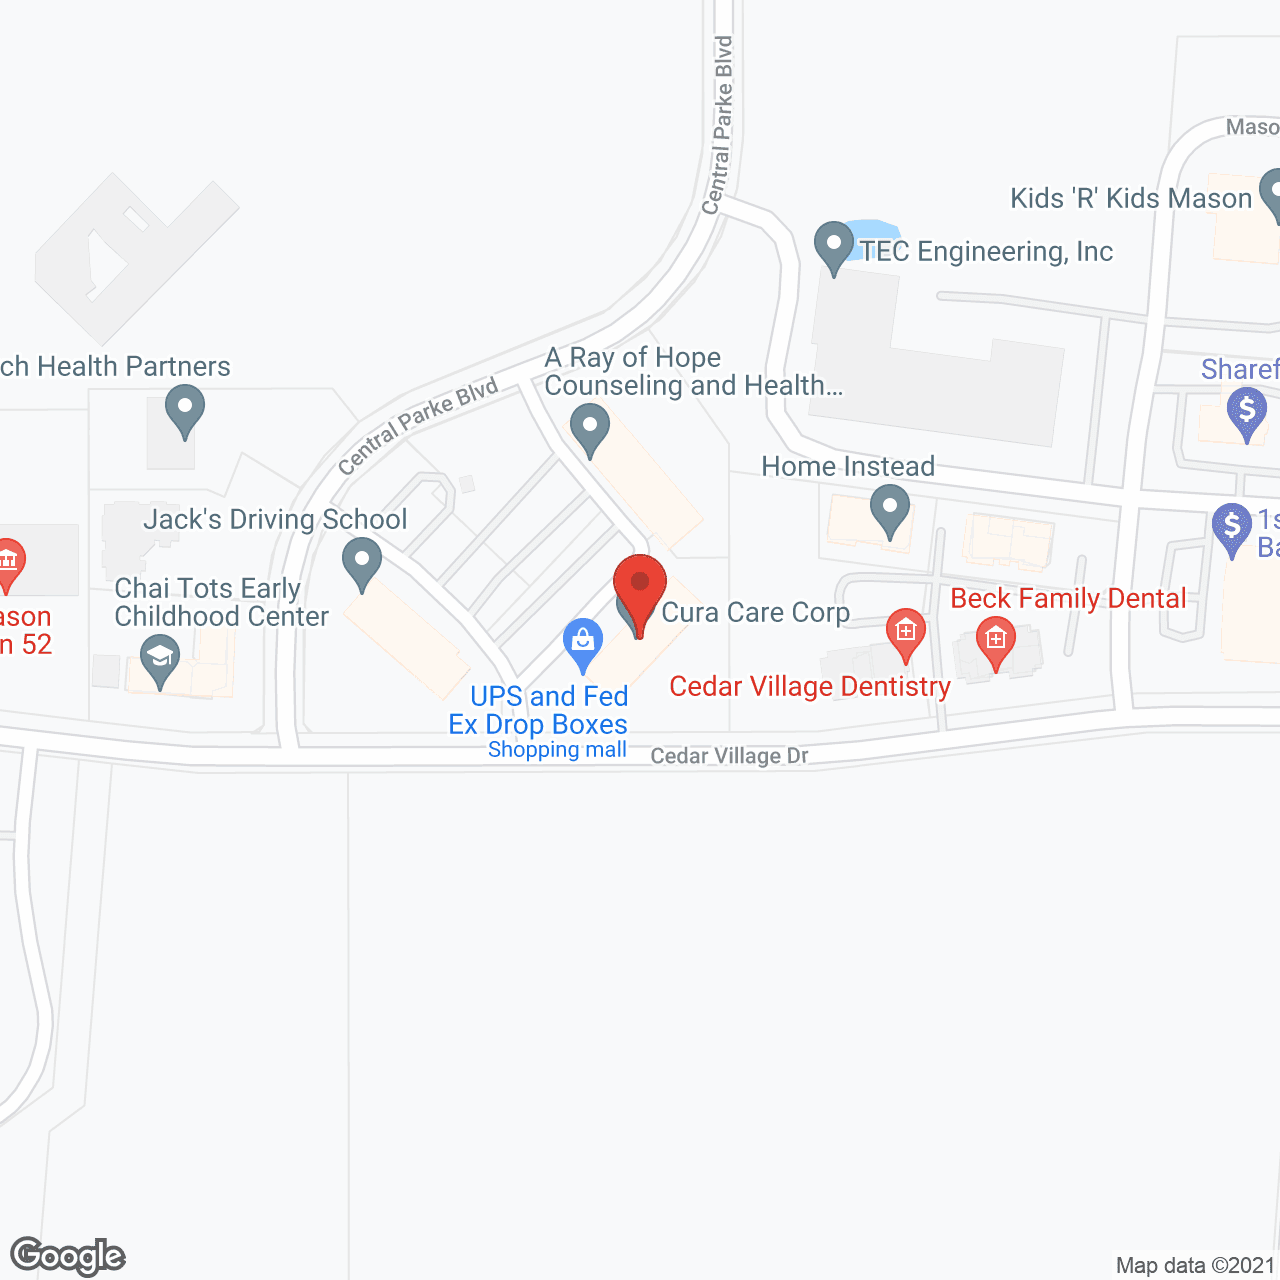 Cura Care Corp in google map